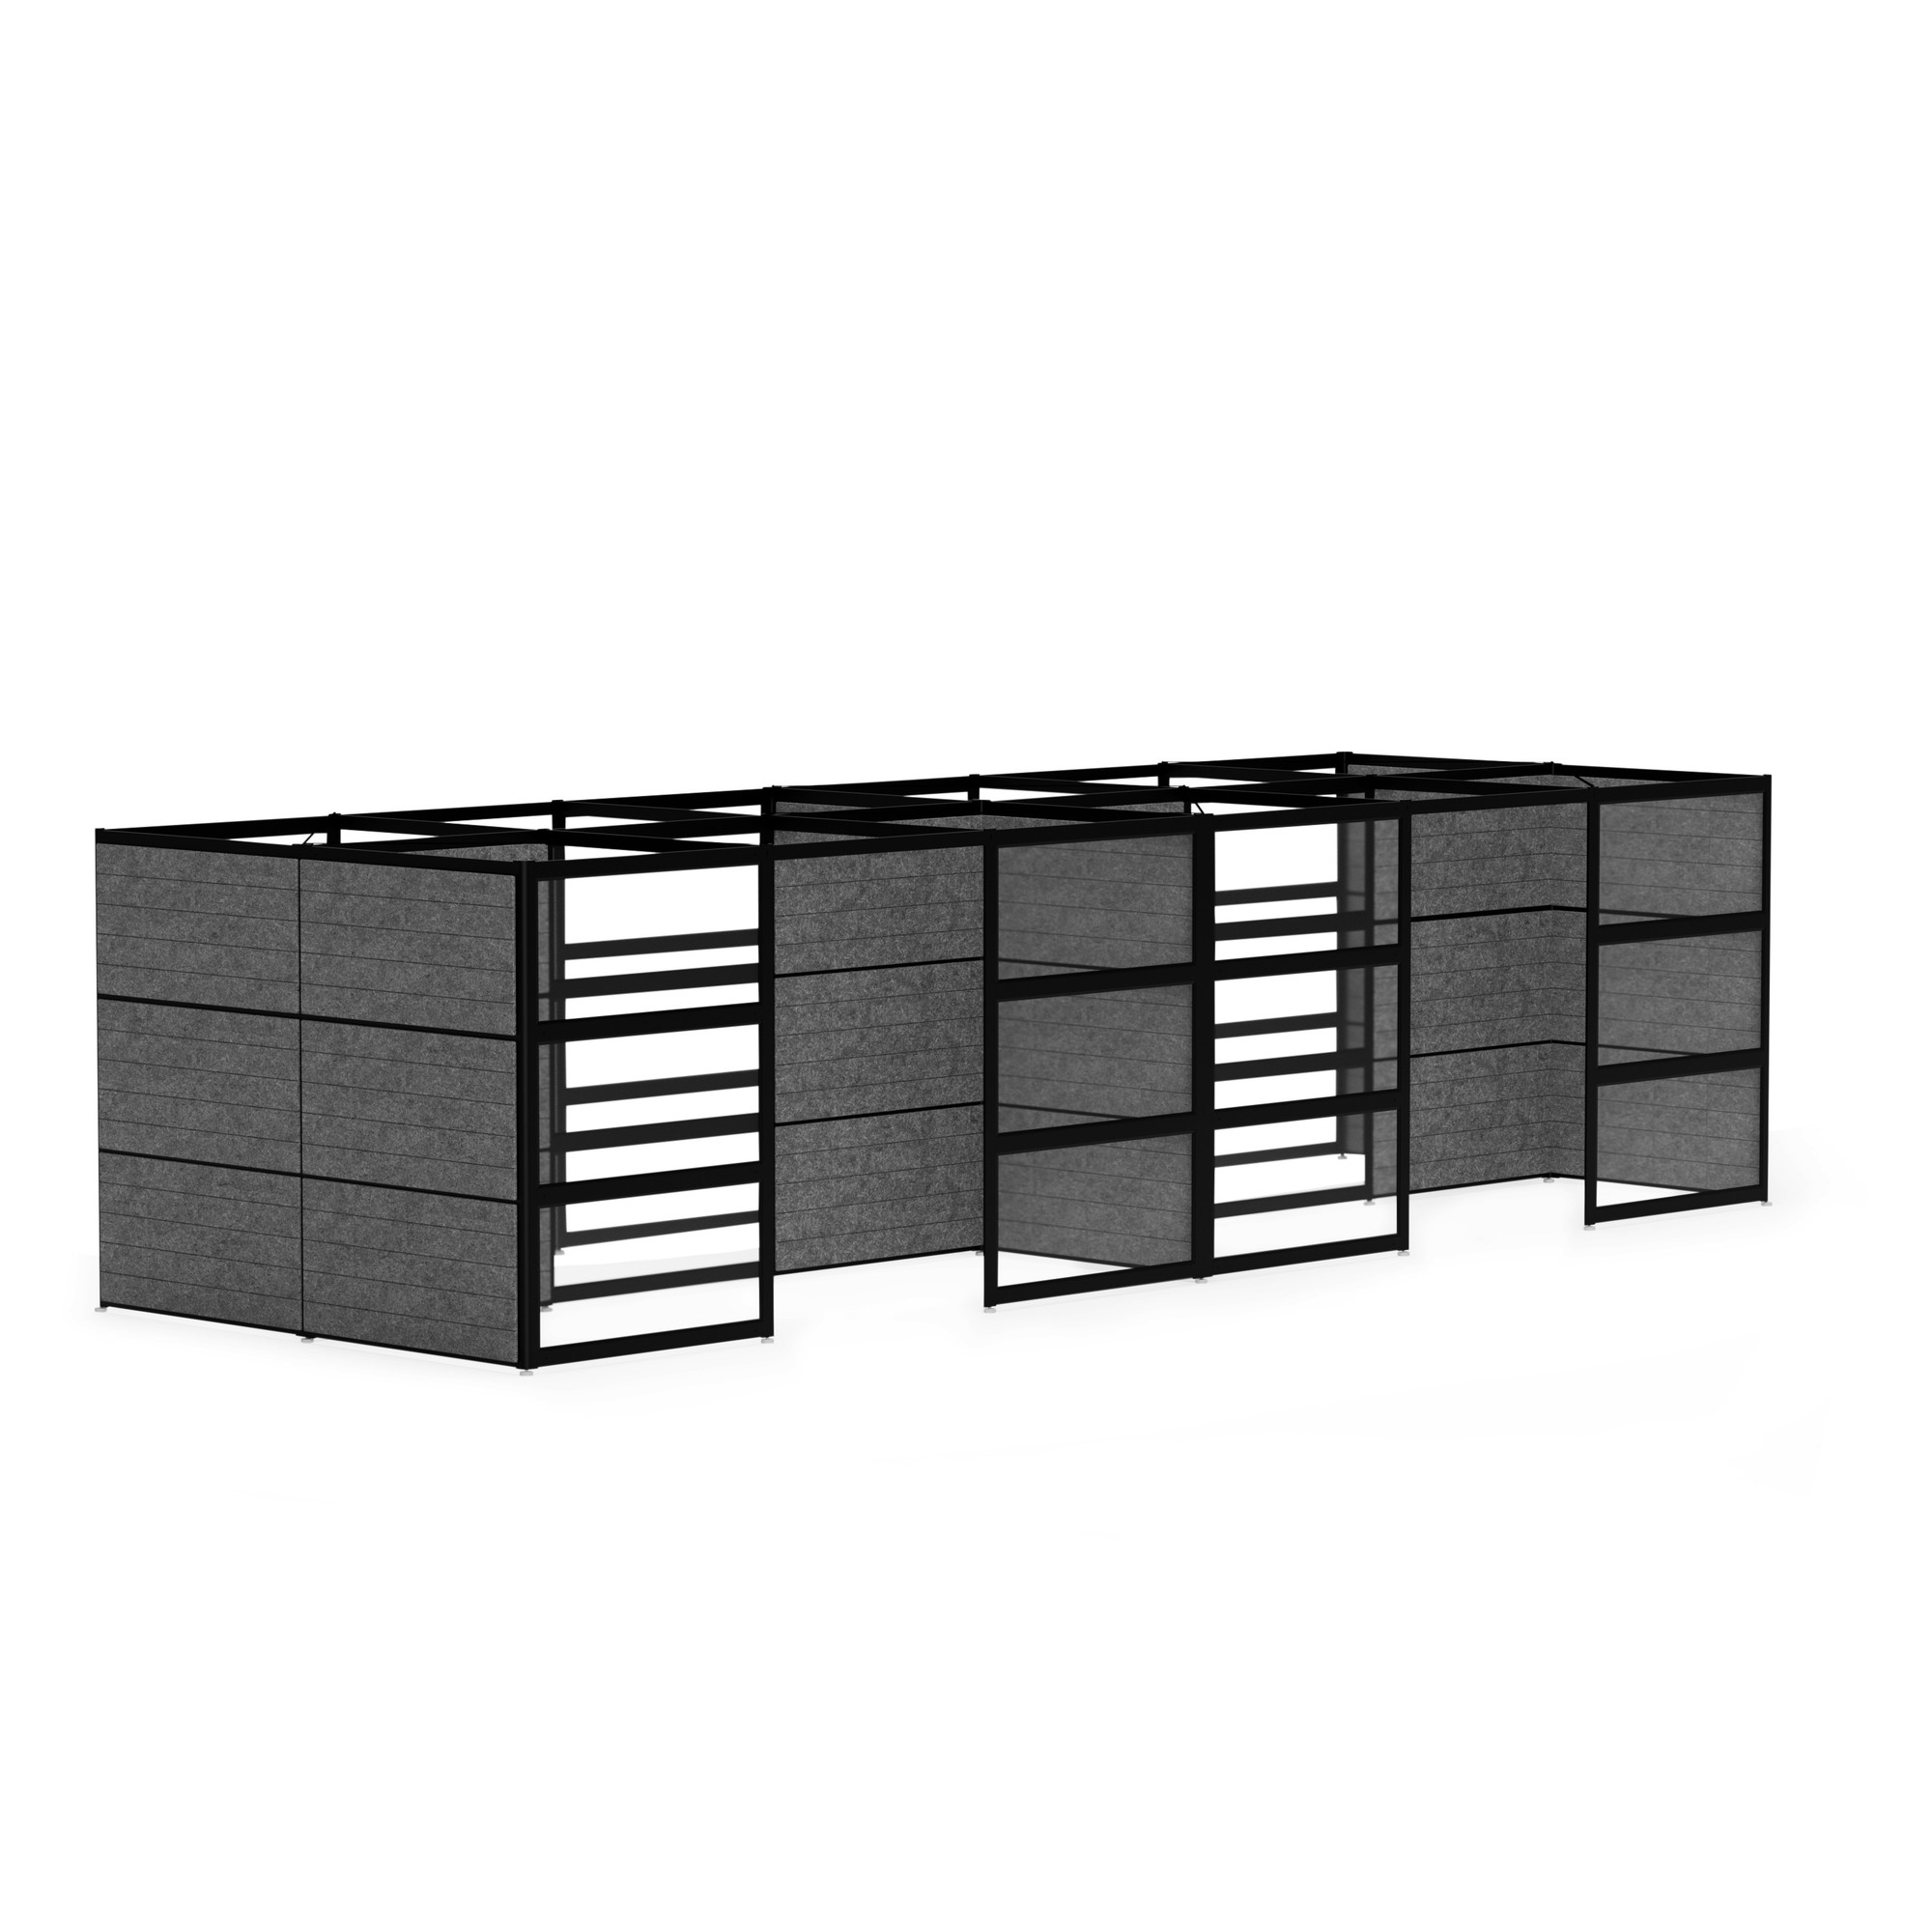 Hive for 8 Space, Semi-Private, Black Beams with Heather Black Acoustic Panels + Clear Glass,Black,hi-res